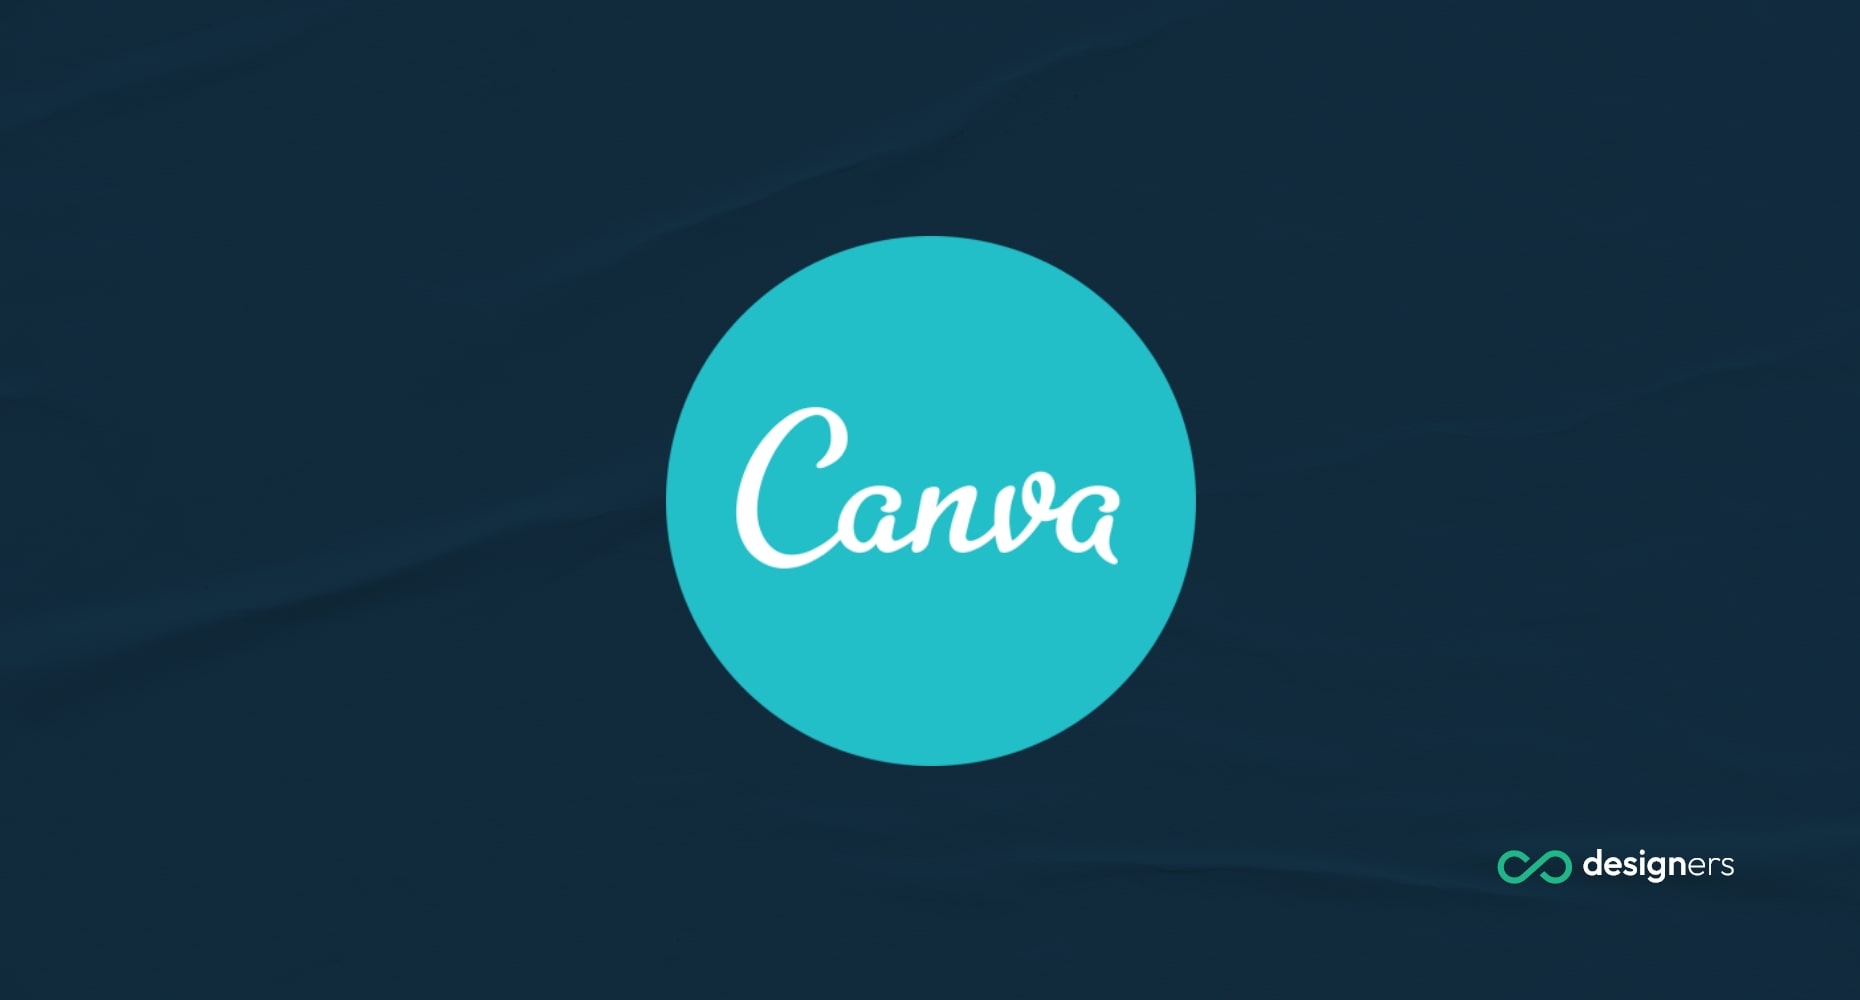 Which are the most aesthetic fonts on free canva?